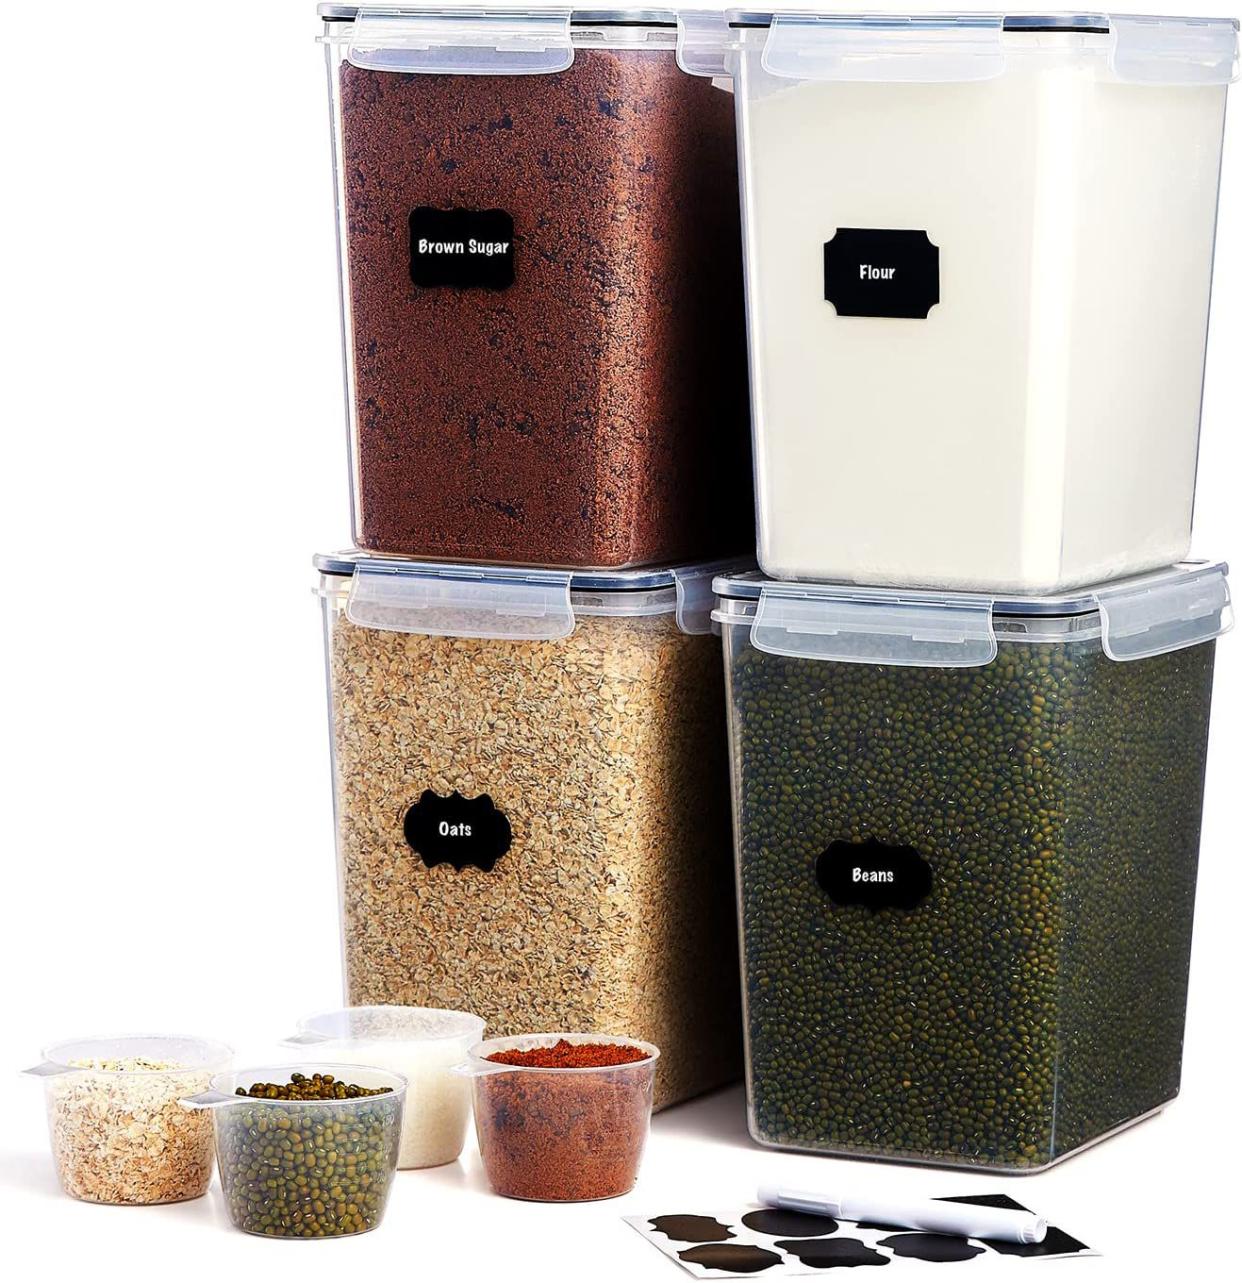 Lifewit Large Food Storage Containers